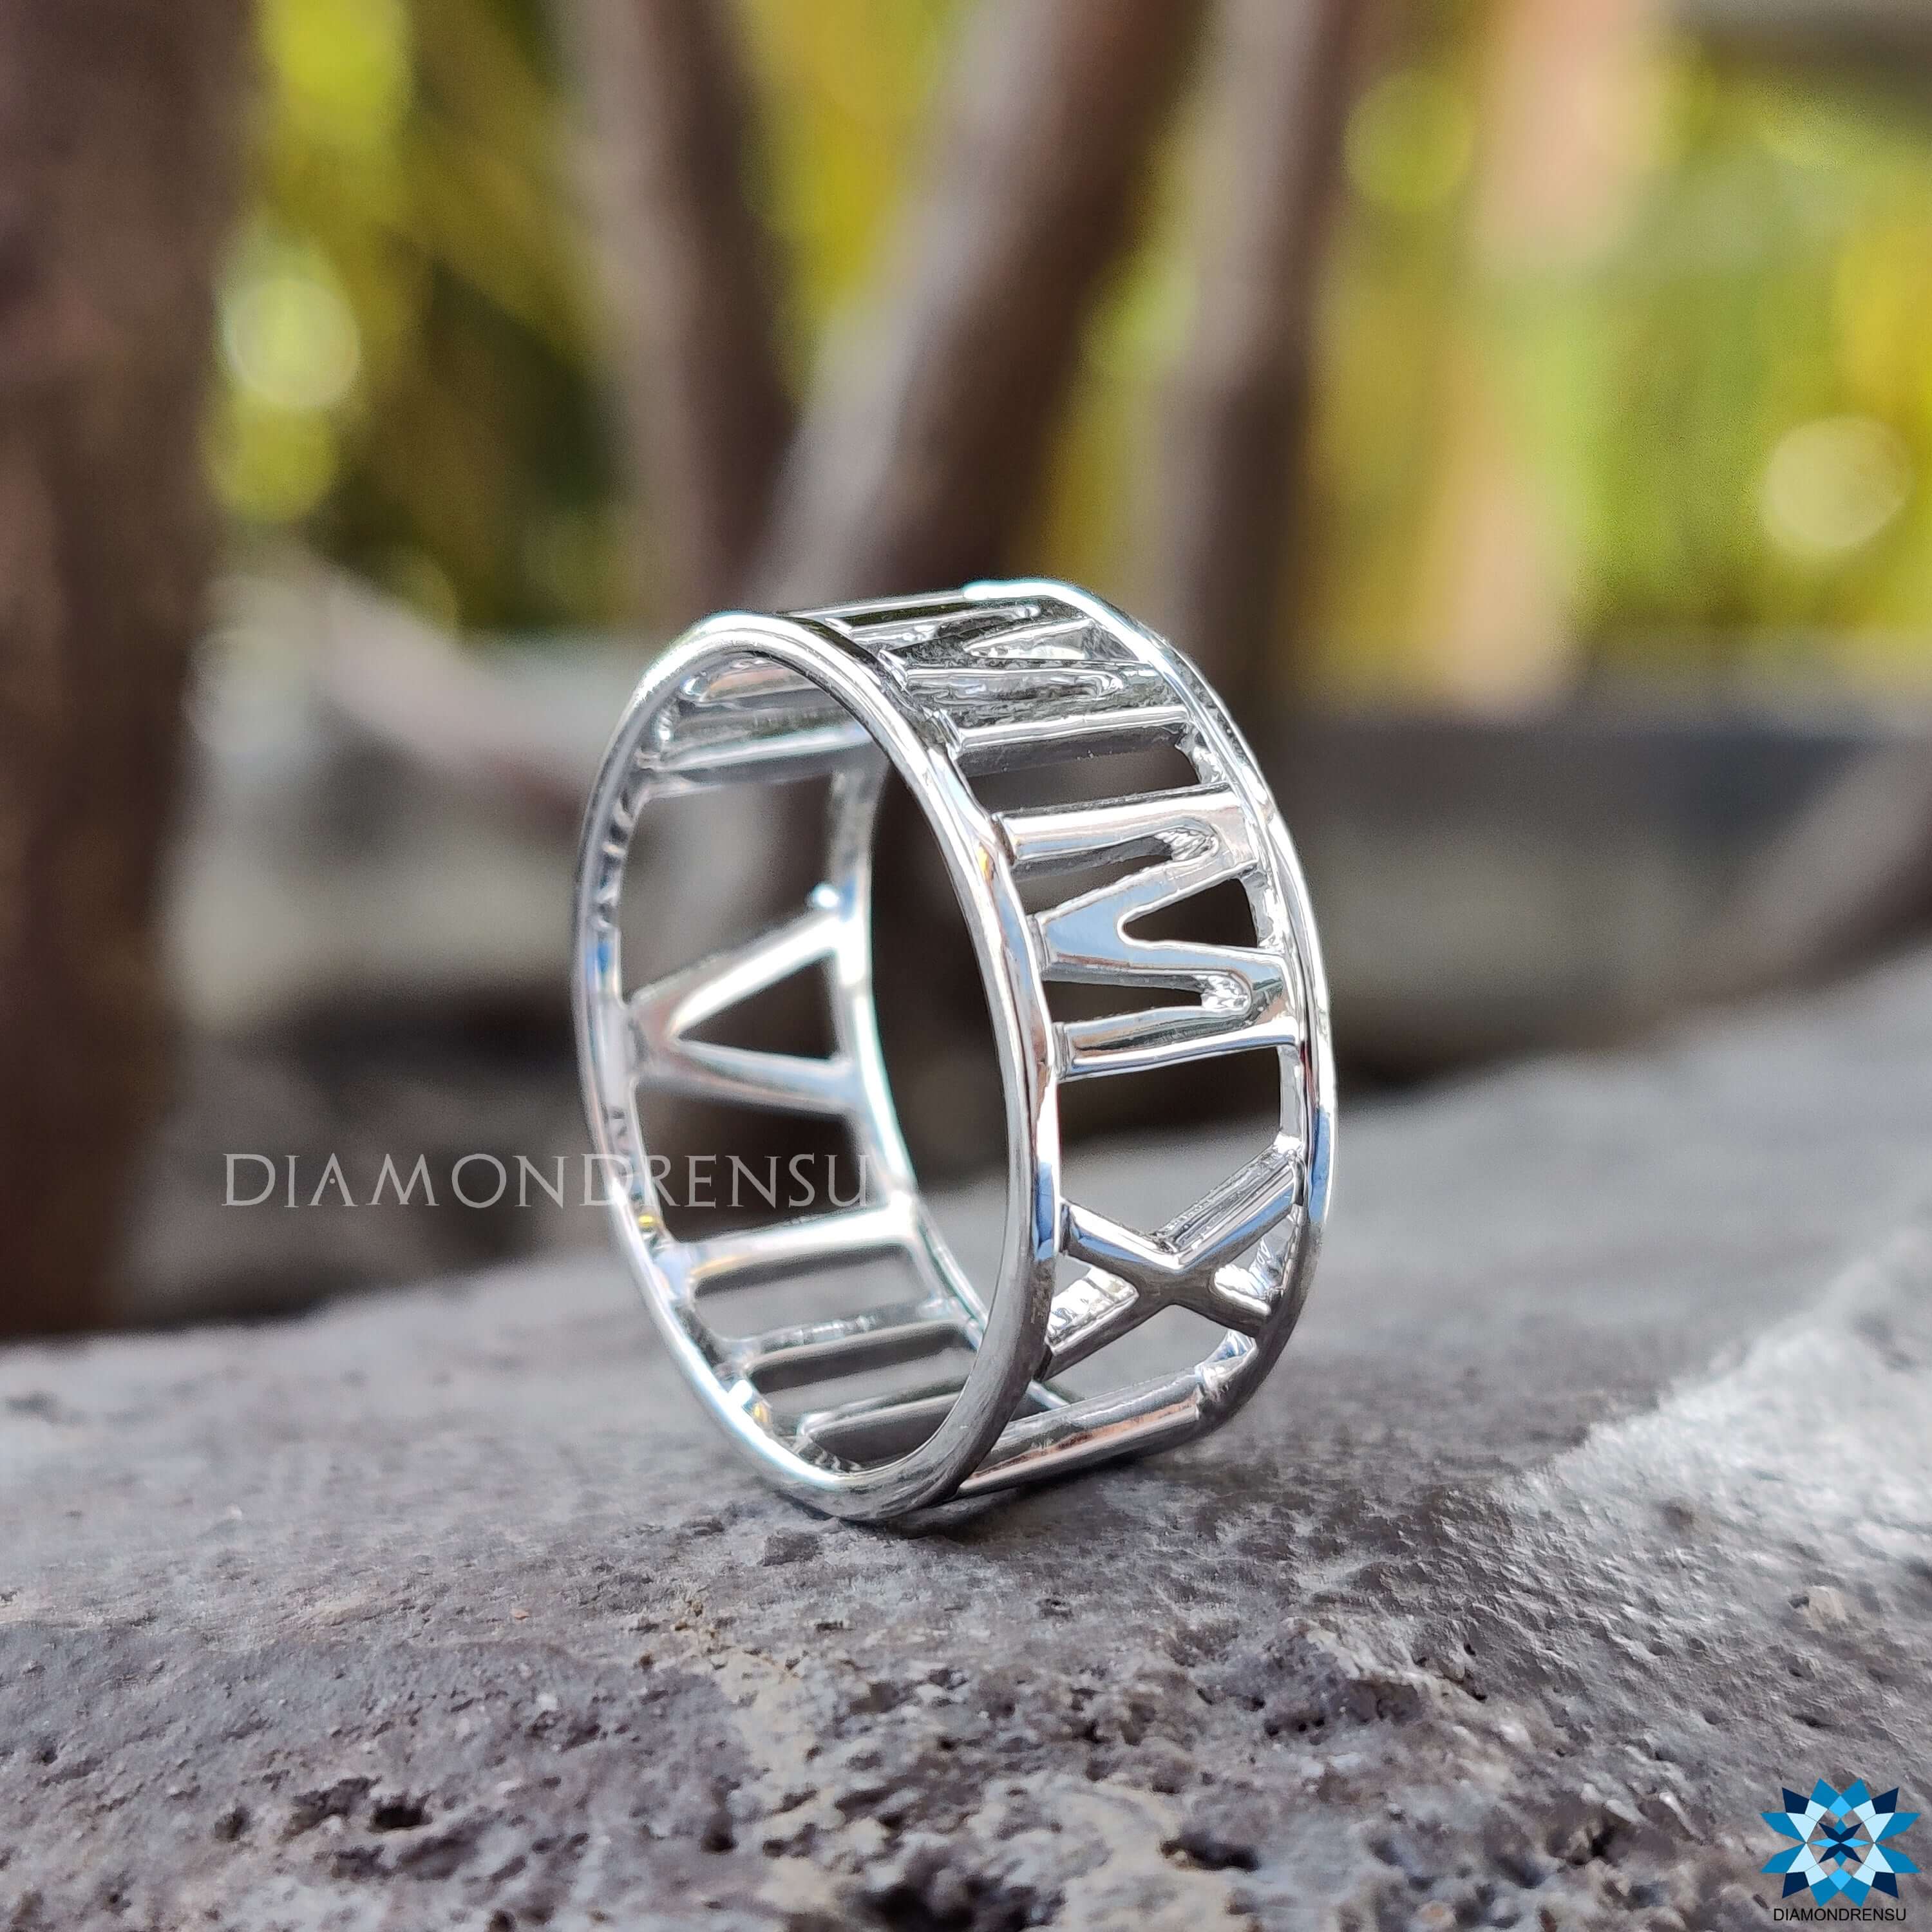 Buy ARZONAI Van Roman numeral shell ring opening with diamond tail ring  index finger ring Stainless Steel Ring Online at Best Prices in India -  JioMart.